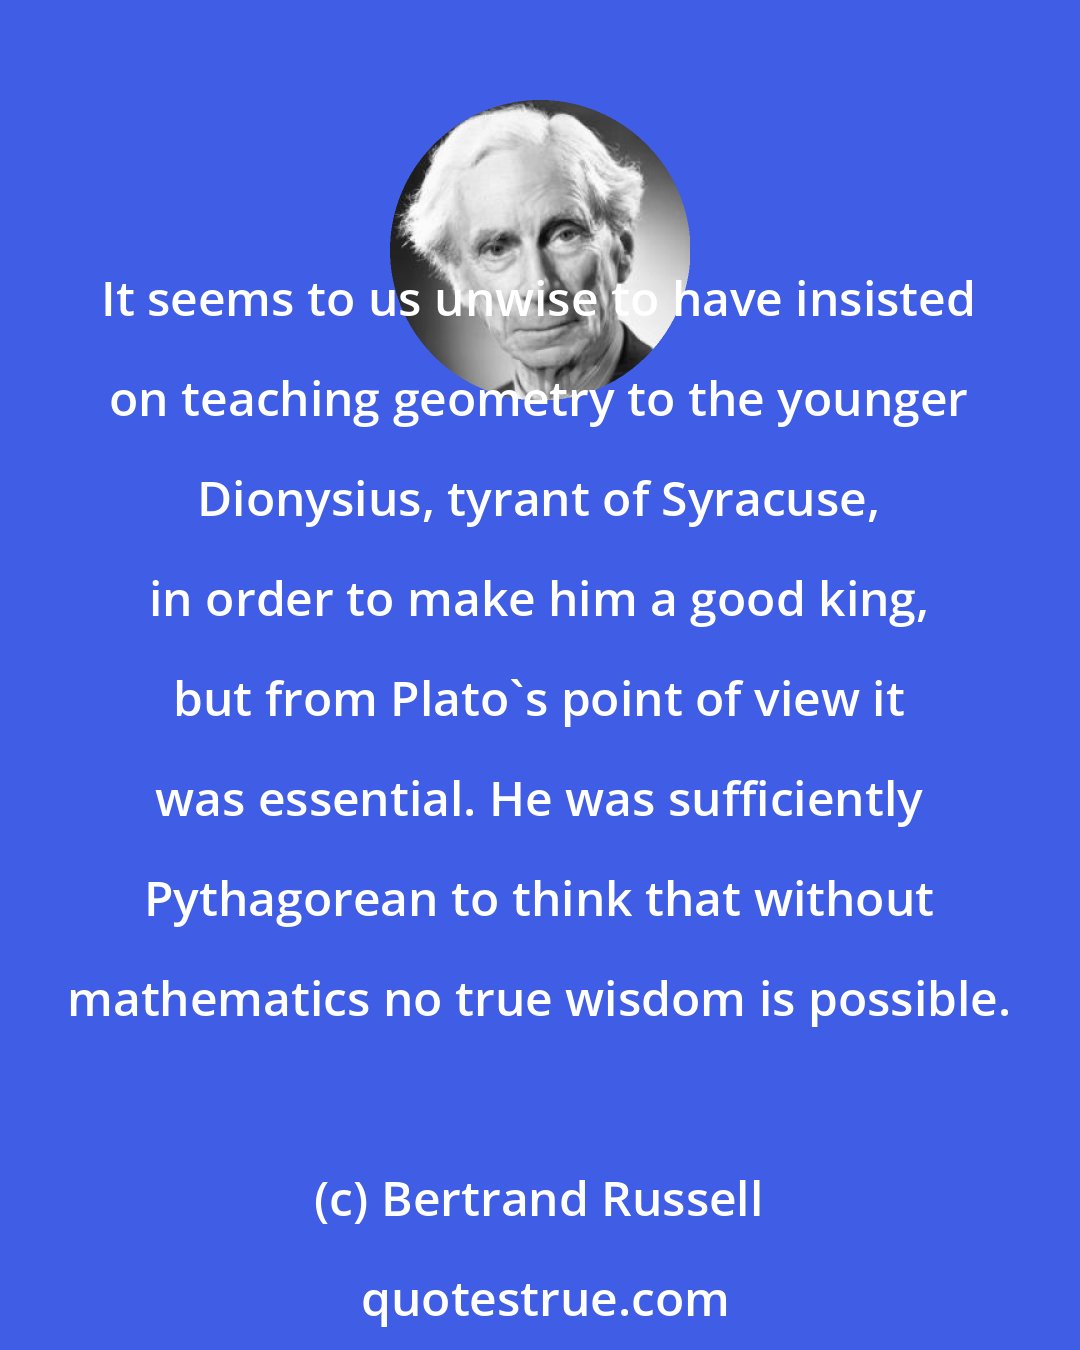 Bertrand Russell: It seems to us unwise to have insisted on teaching geometry to the younger Dionysius, tyrant of Syracuse, in order to make him a good king, but from Plato's point of view it was essential. He was sufficiently Pythagorean to think that without mathematics no true wisdom is possible.